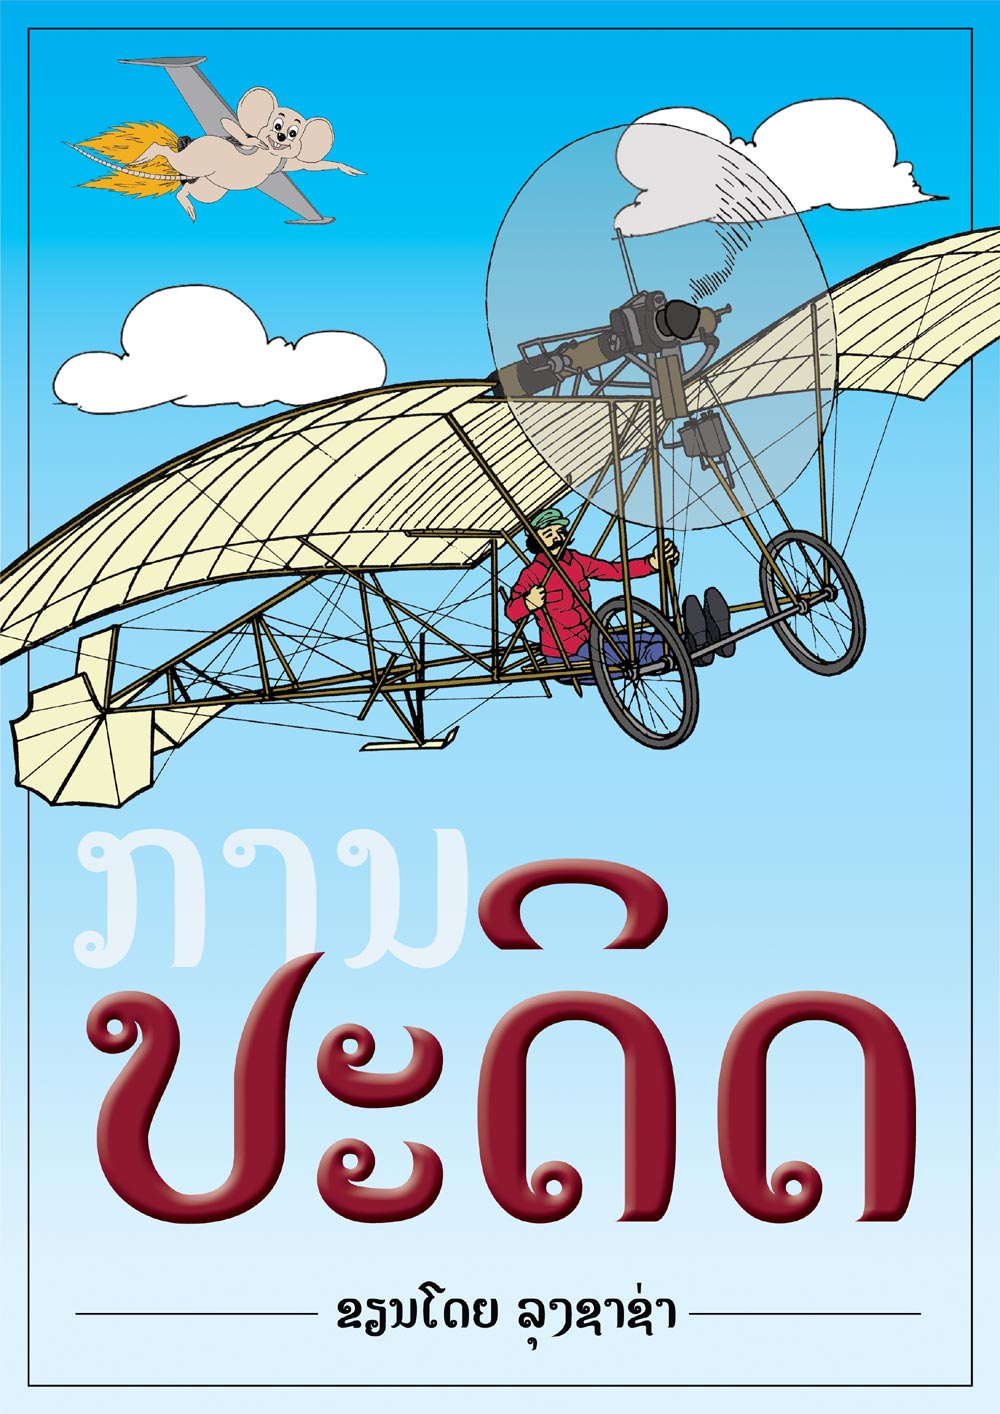 Inventions large book cover, published in Lao language